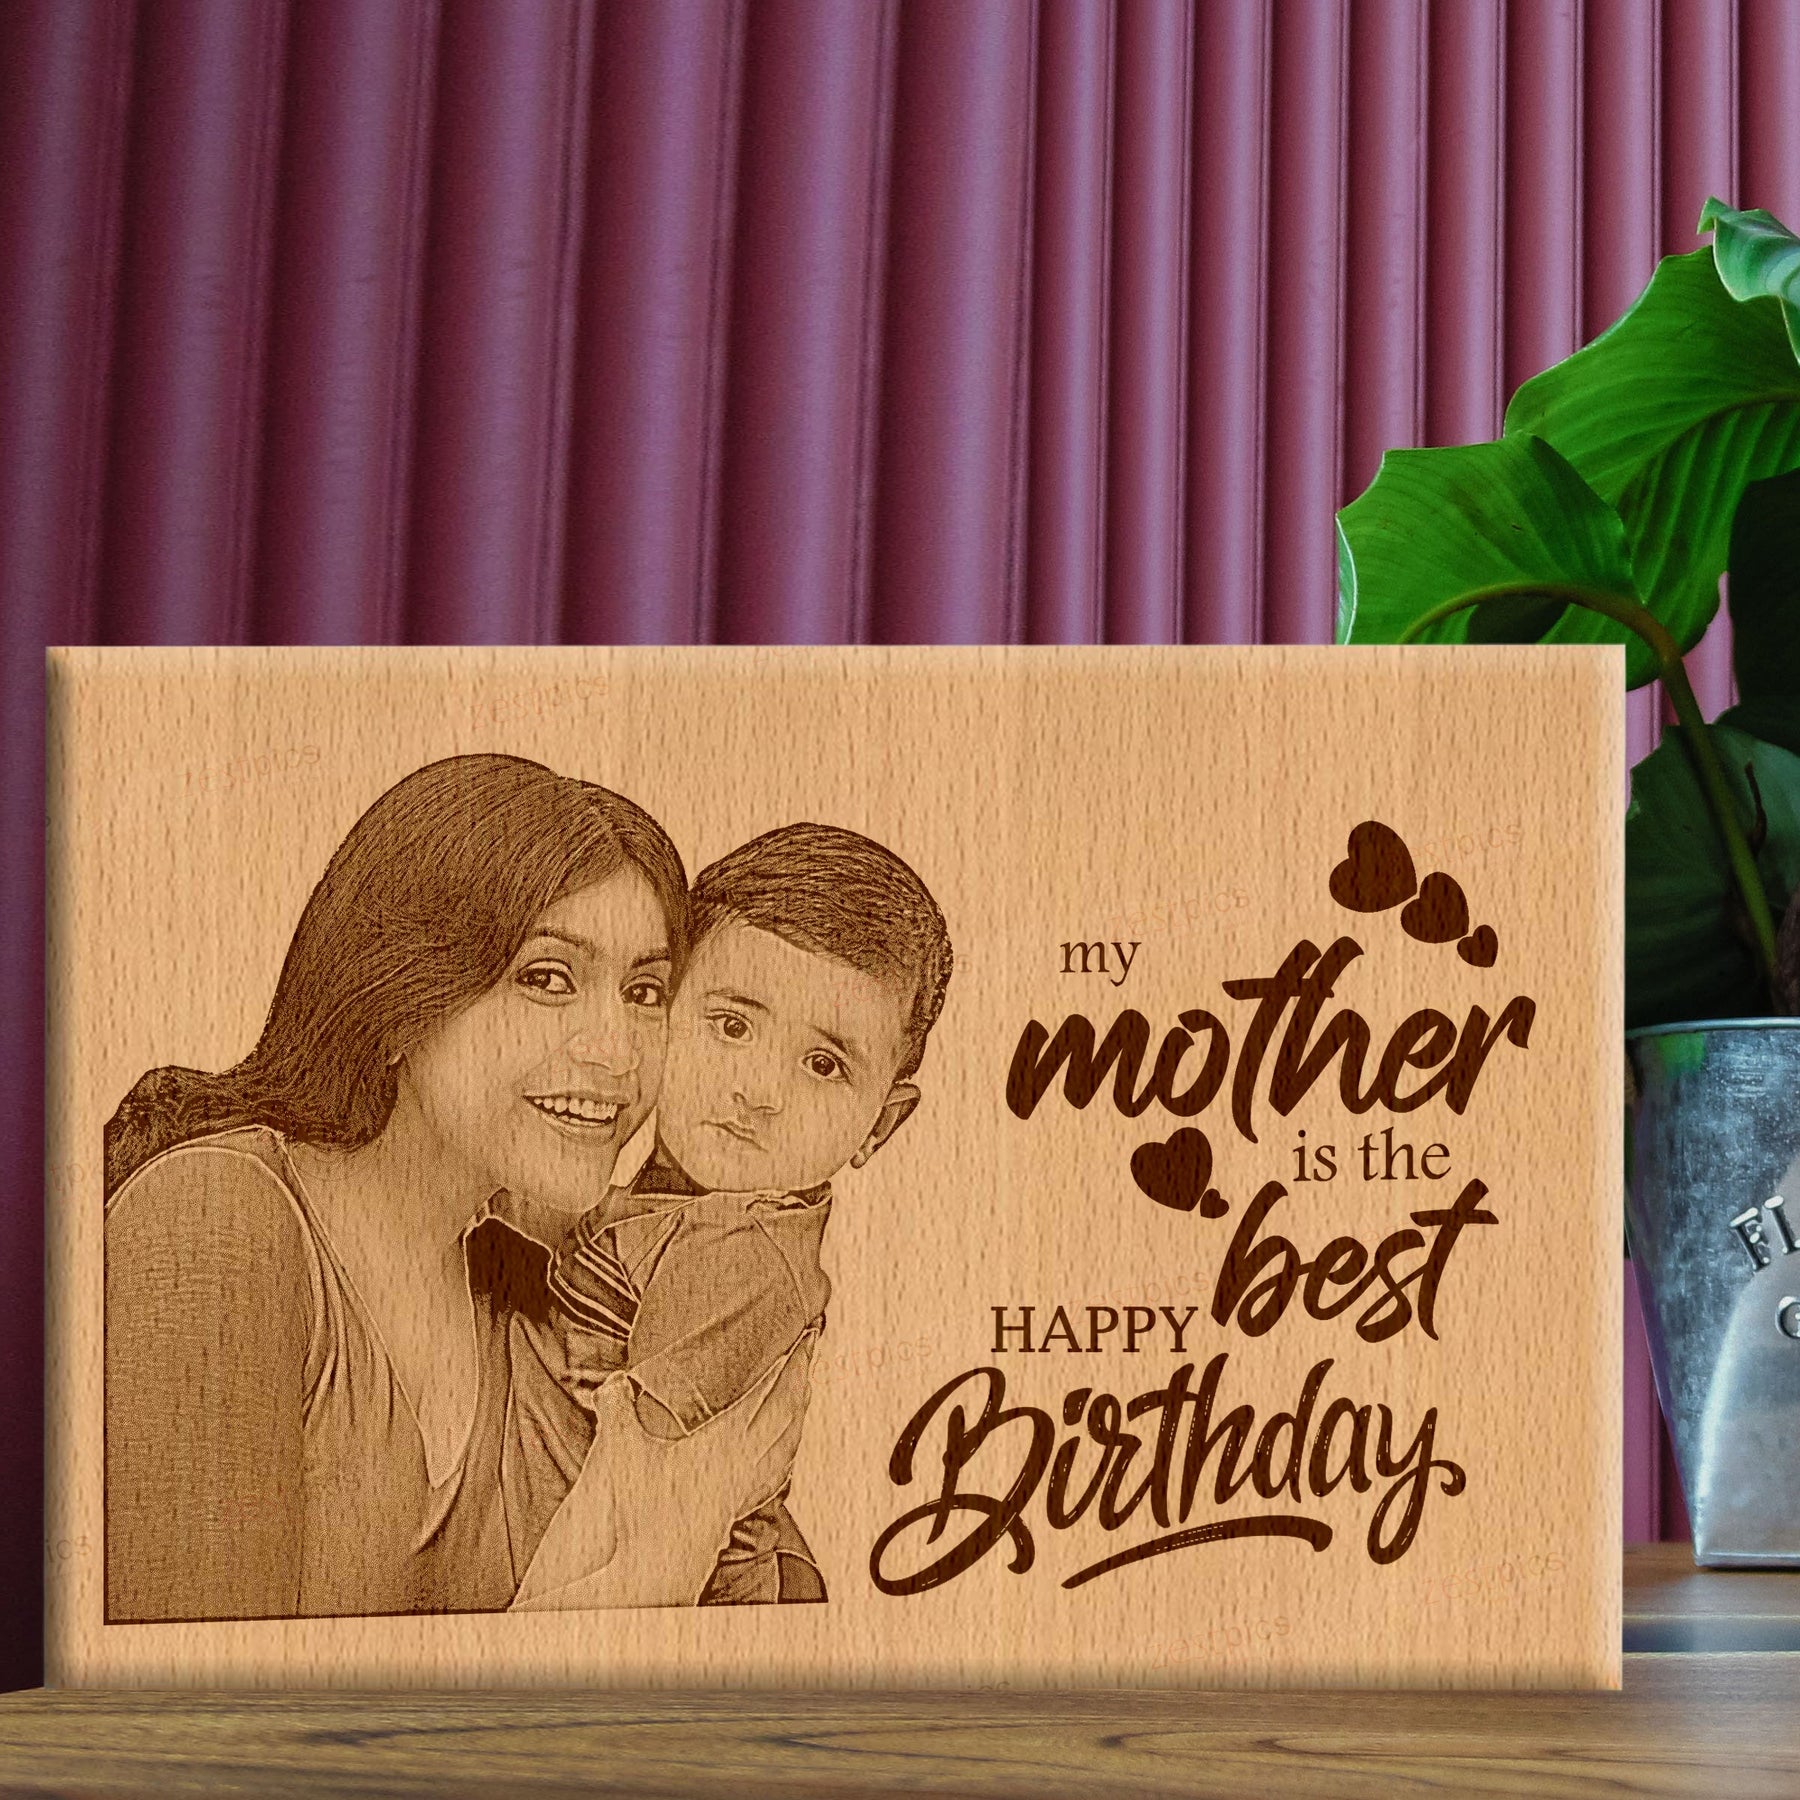 The Best Mothers Day Gifts Every Cool Mom Will Love - Society19 | Presents  for mom, Diy gifts for girlfriend, Christmas gifts for mom